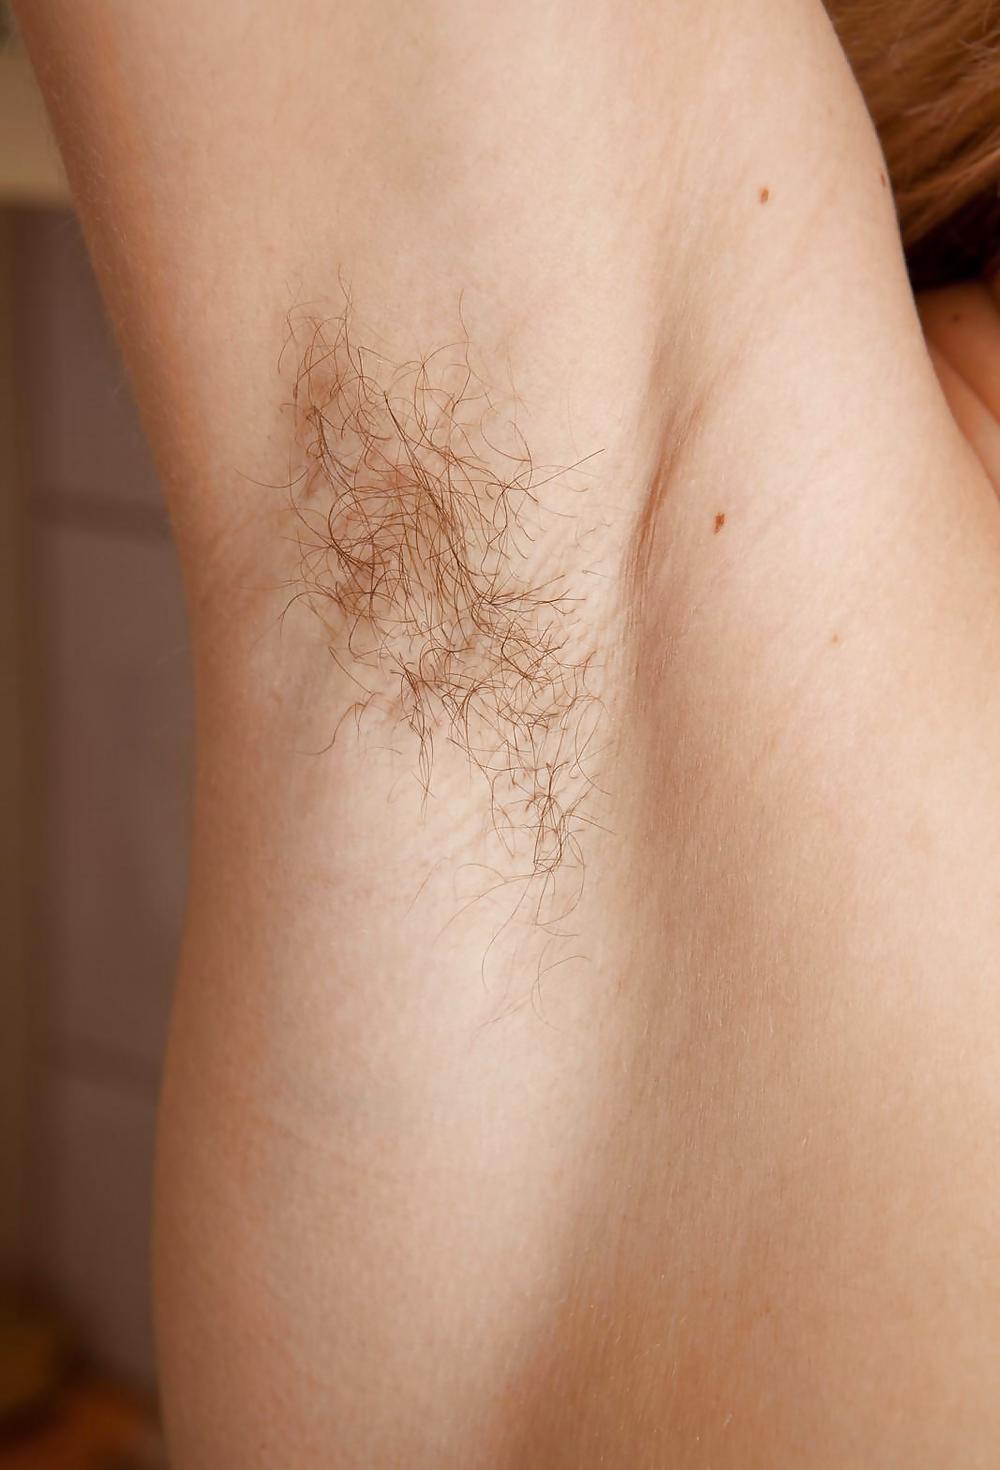 Miscellaneous girls showing hairy, unshaven armpits 1 #36224833